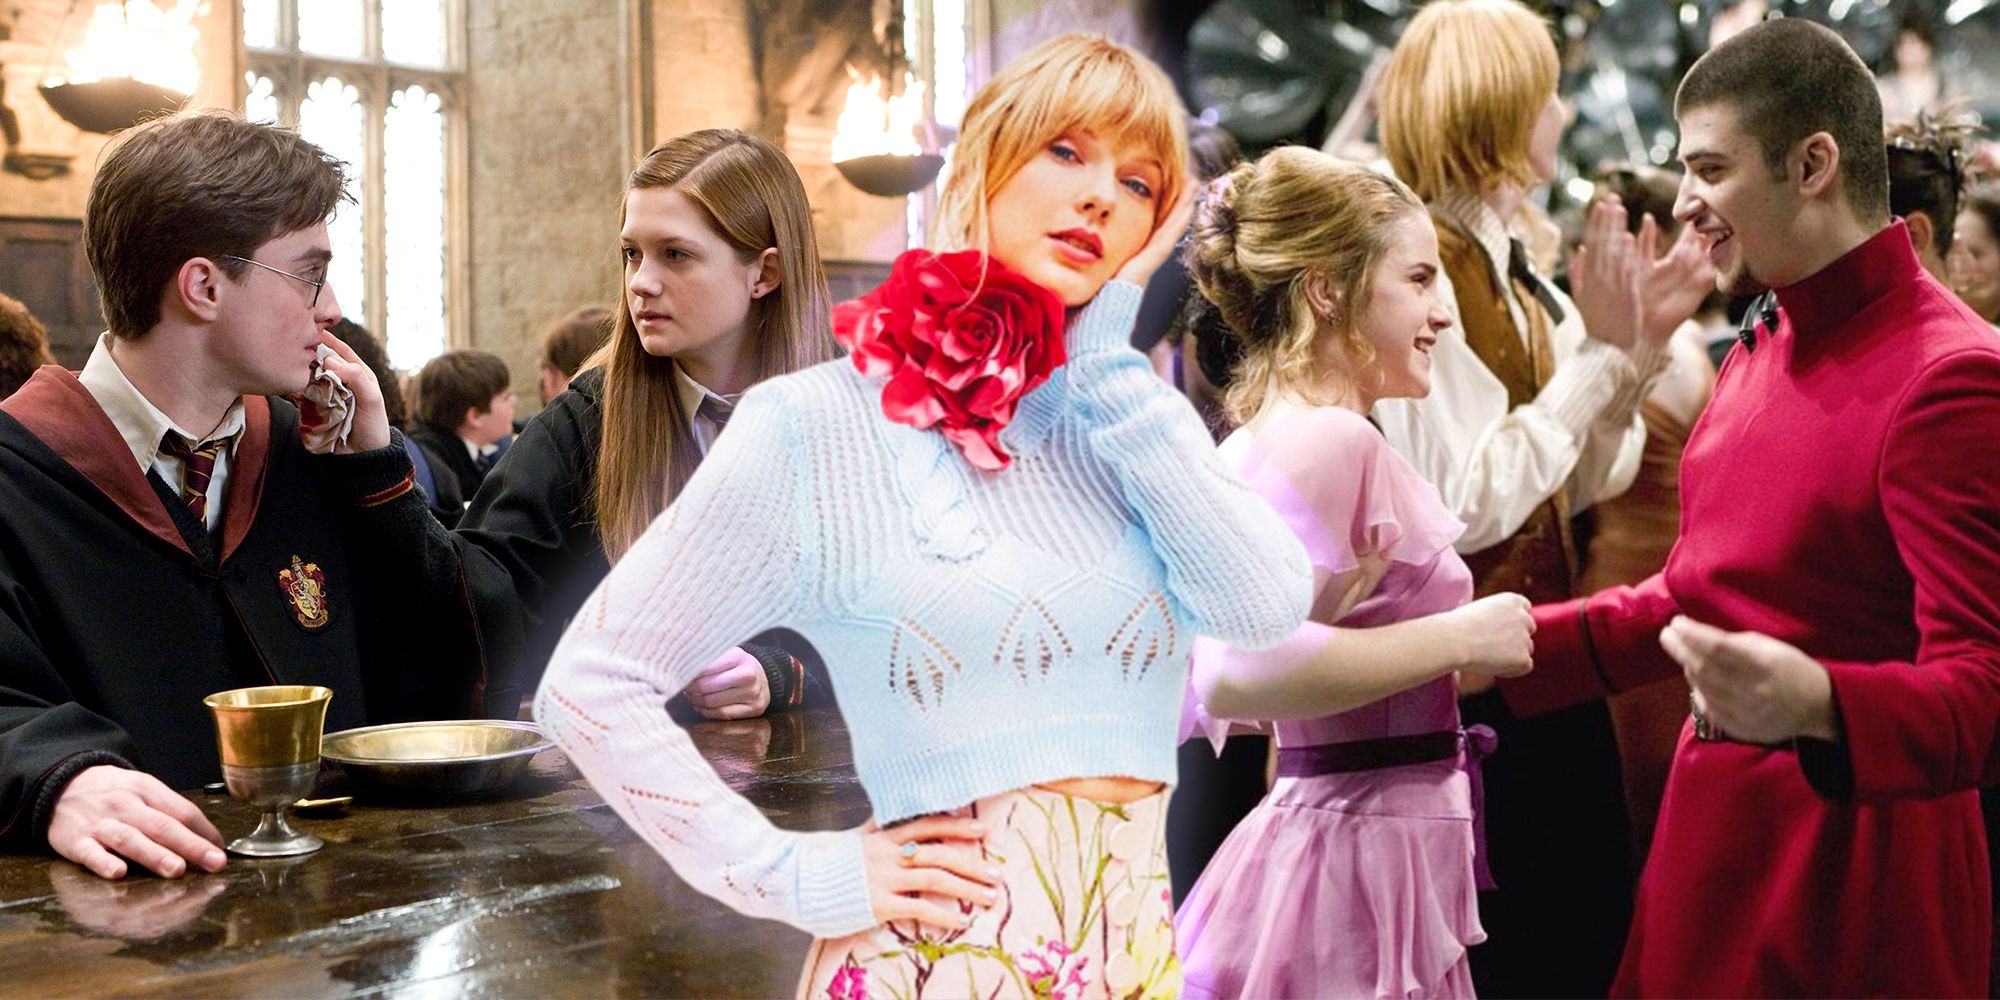 Taylor Swift superimposed over split images of Ginny and harry and Hermione and Viktor from Harry Potter.